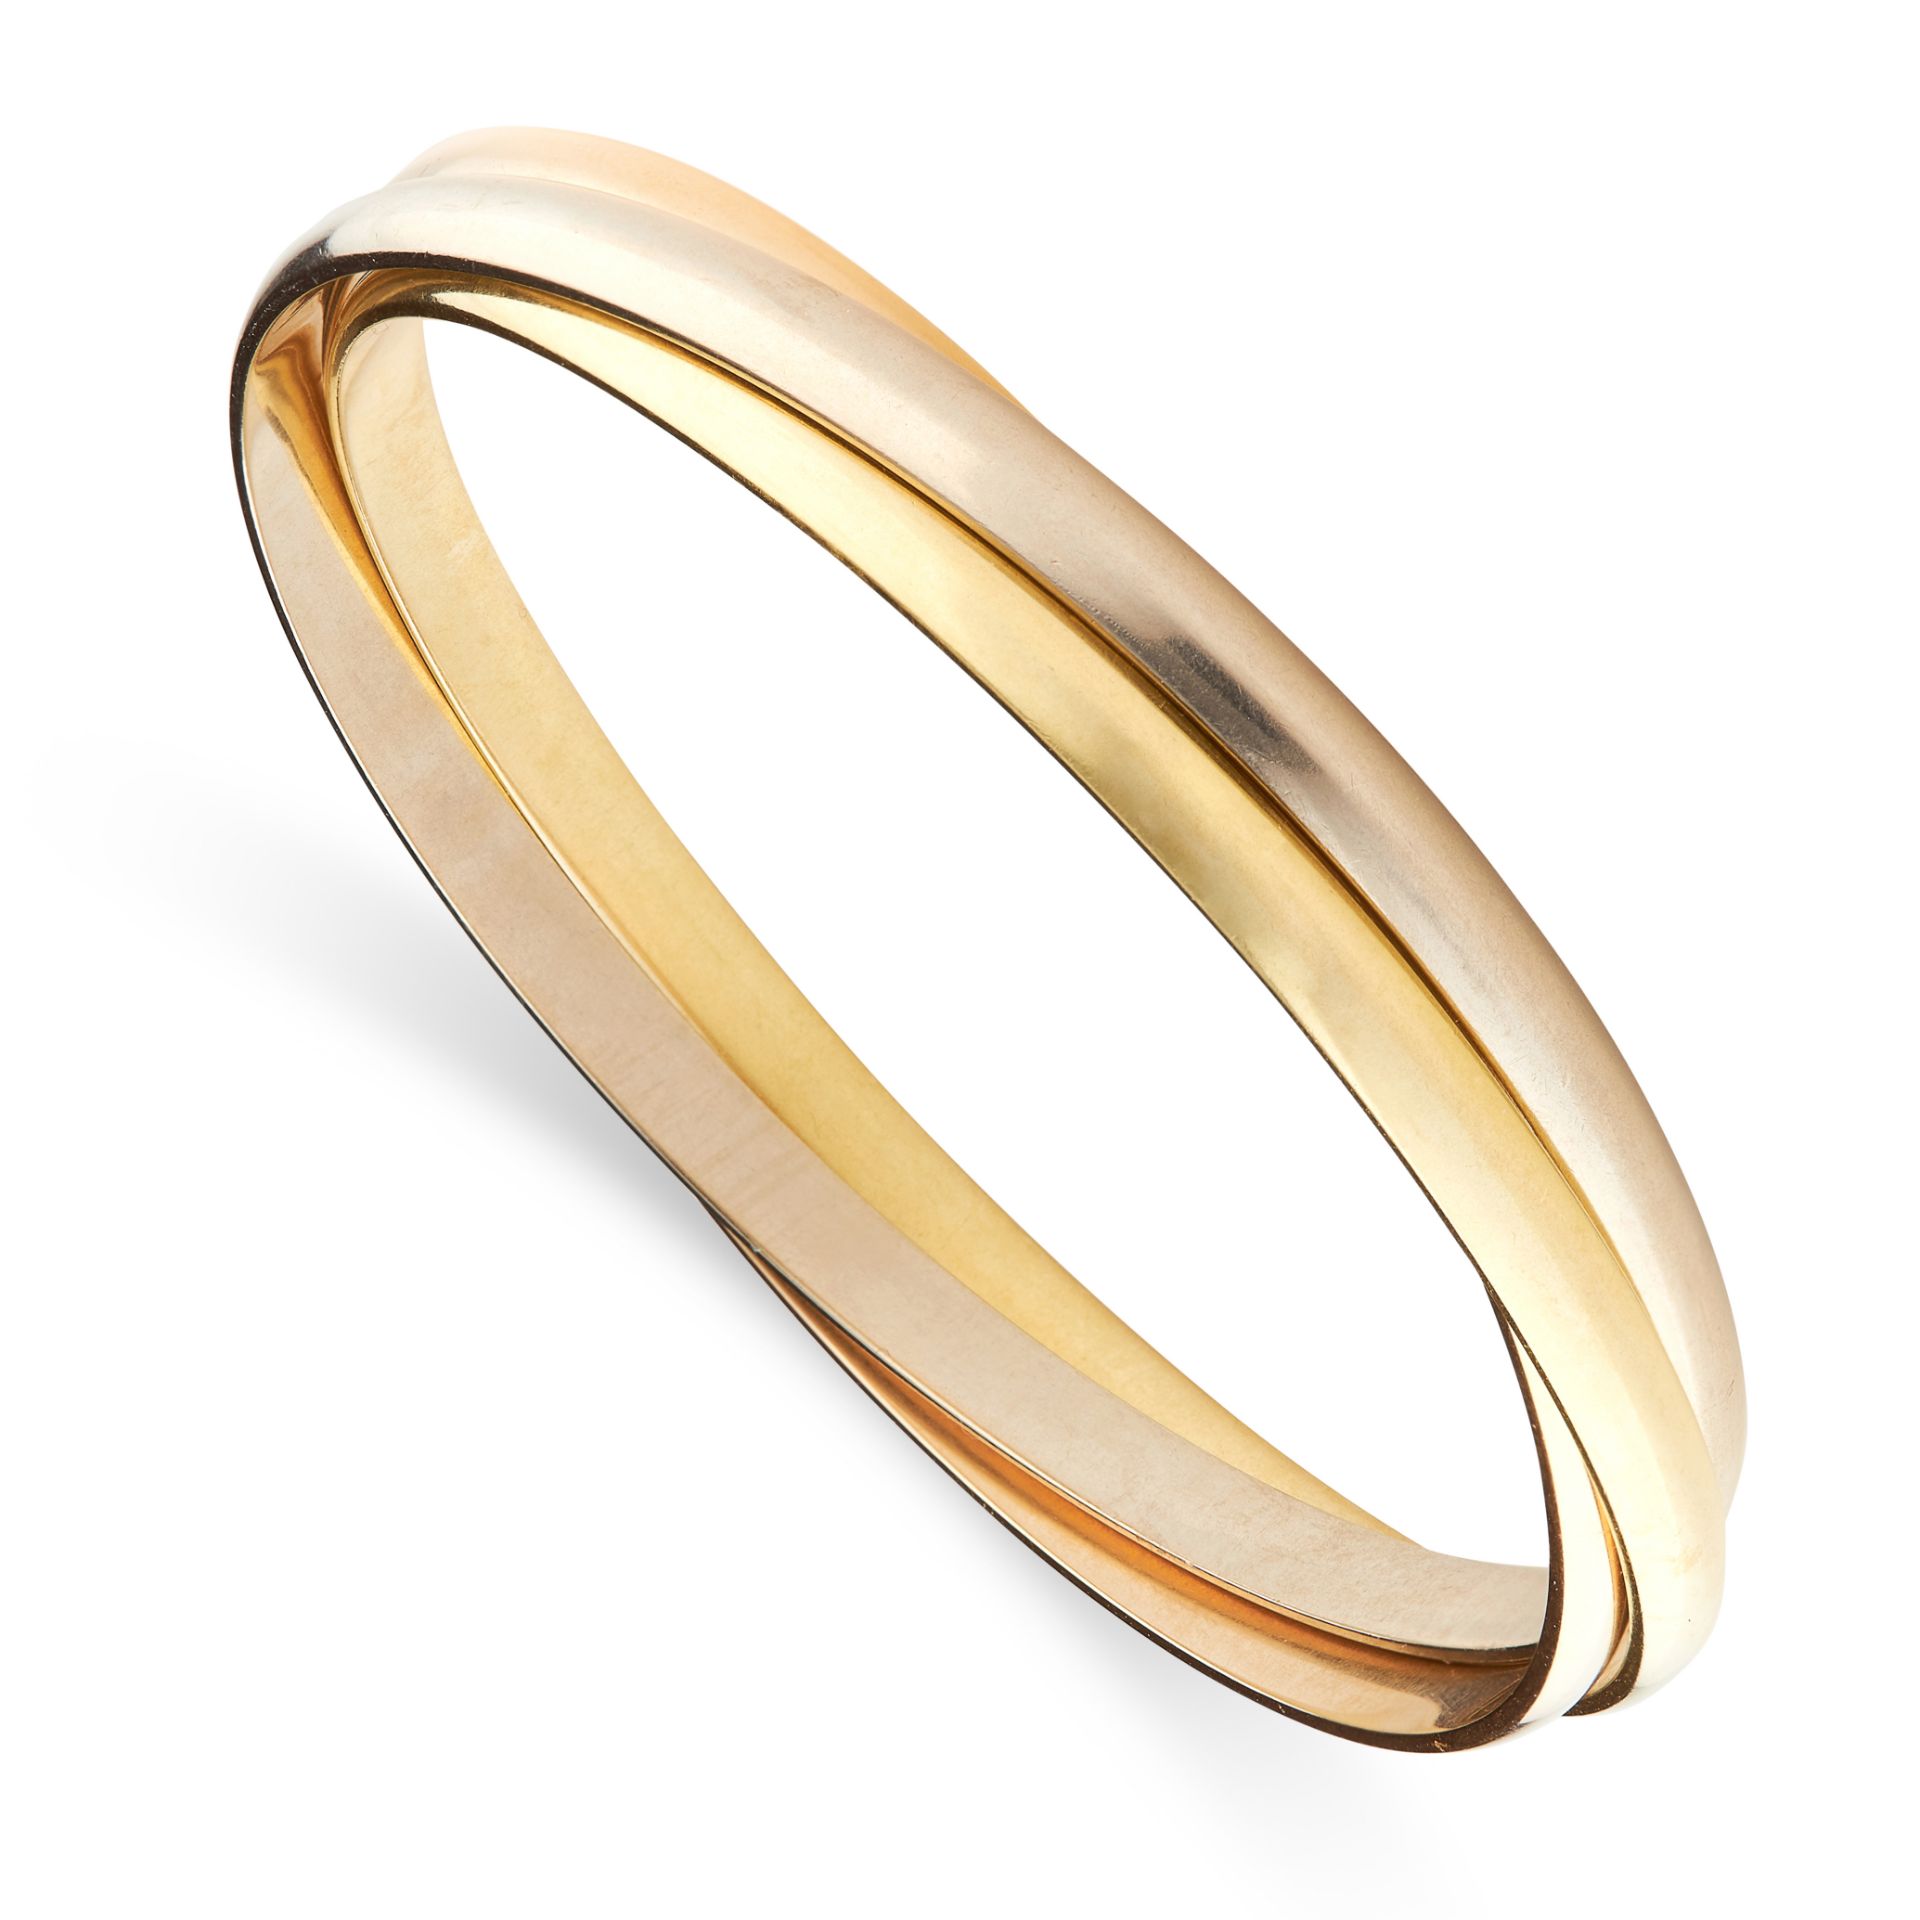 A TRINITY DE CARTIER BRACELET, CARTIER in 18ct yellow, white and rose gold, designed as a trio of